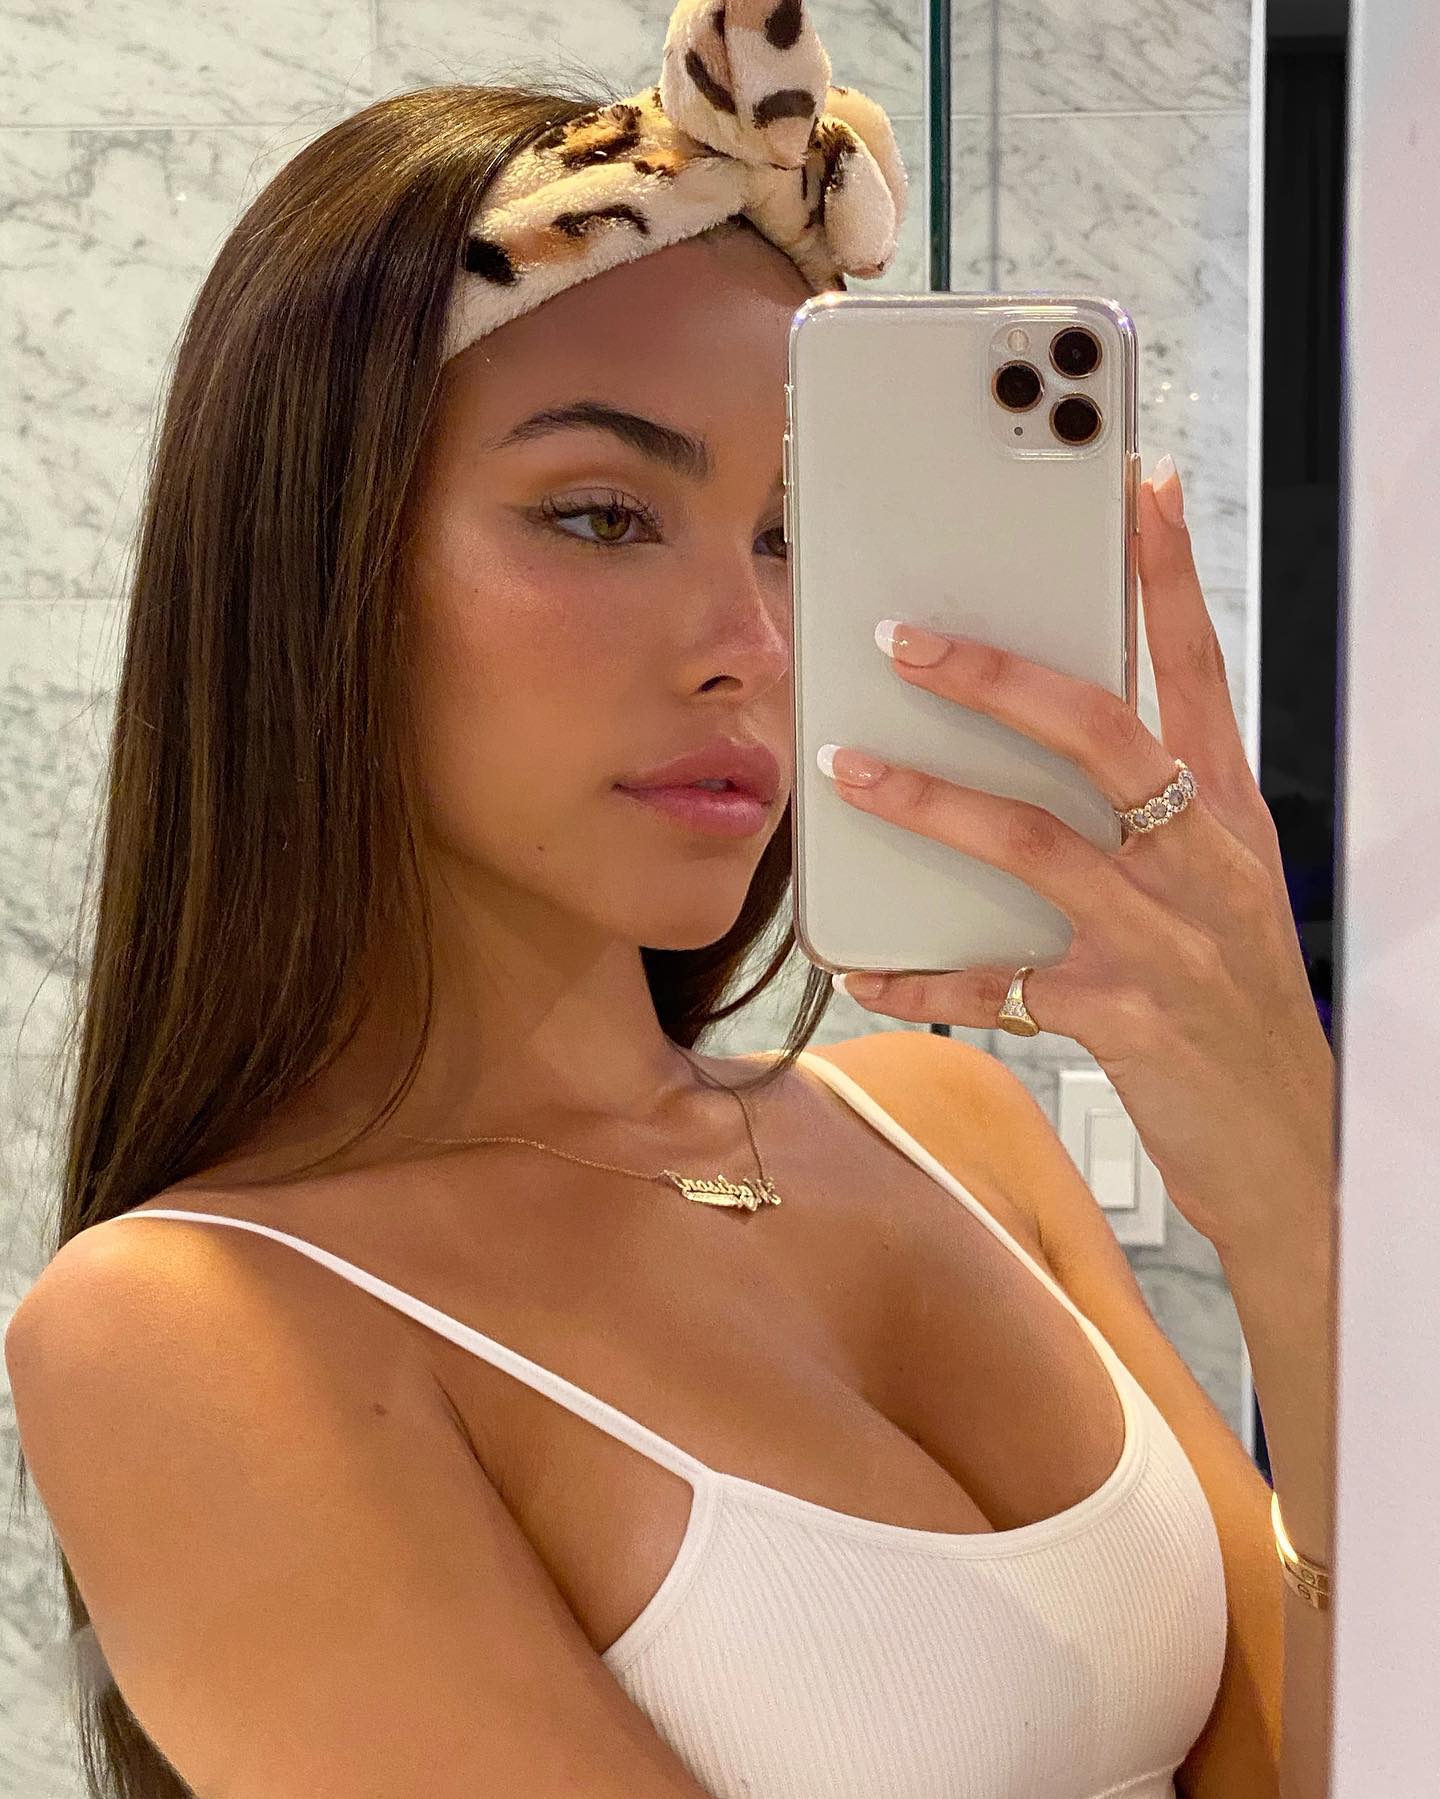 Madison Beer Bio, Age, Height, Weight, Body Measurements, Bra Size, Bust Size, Hips Size, Waist Size, Net Worth, Career